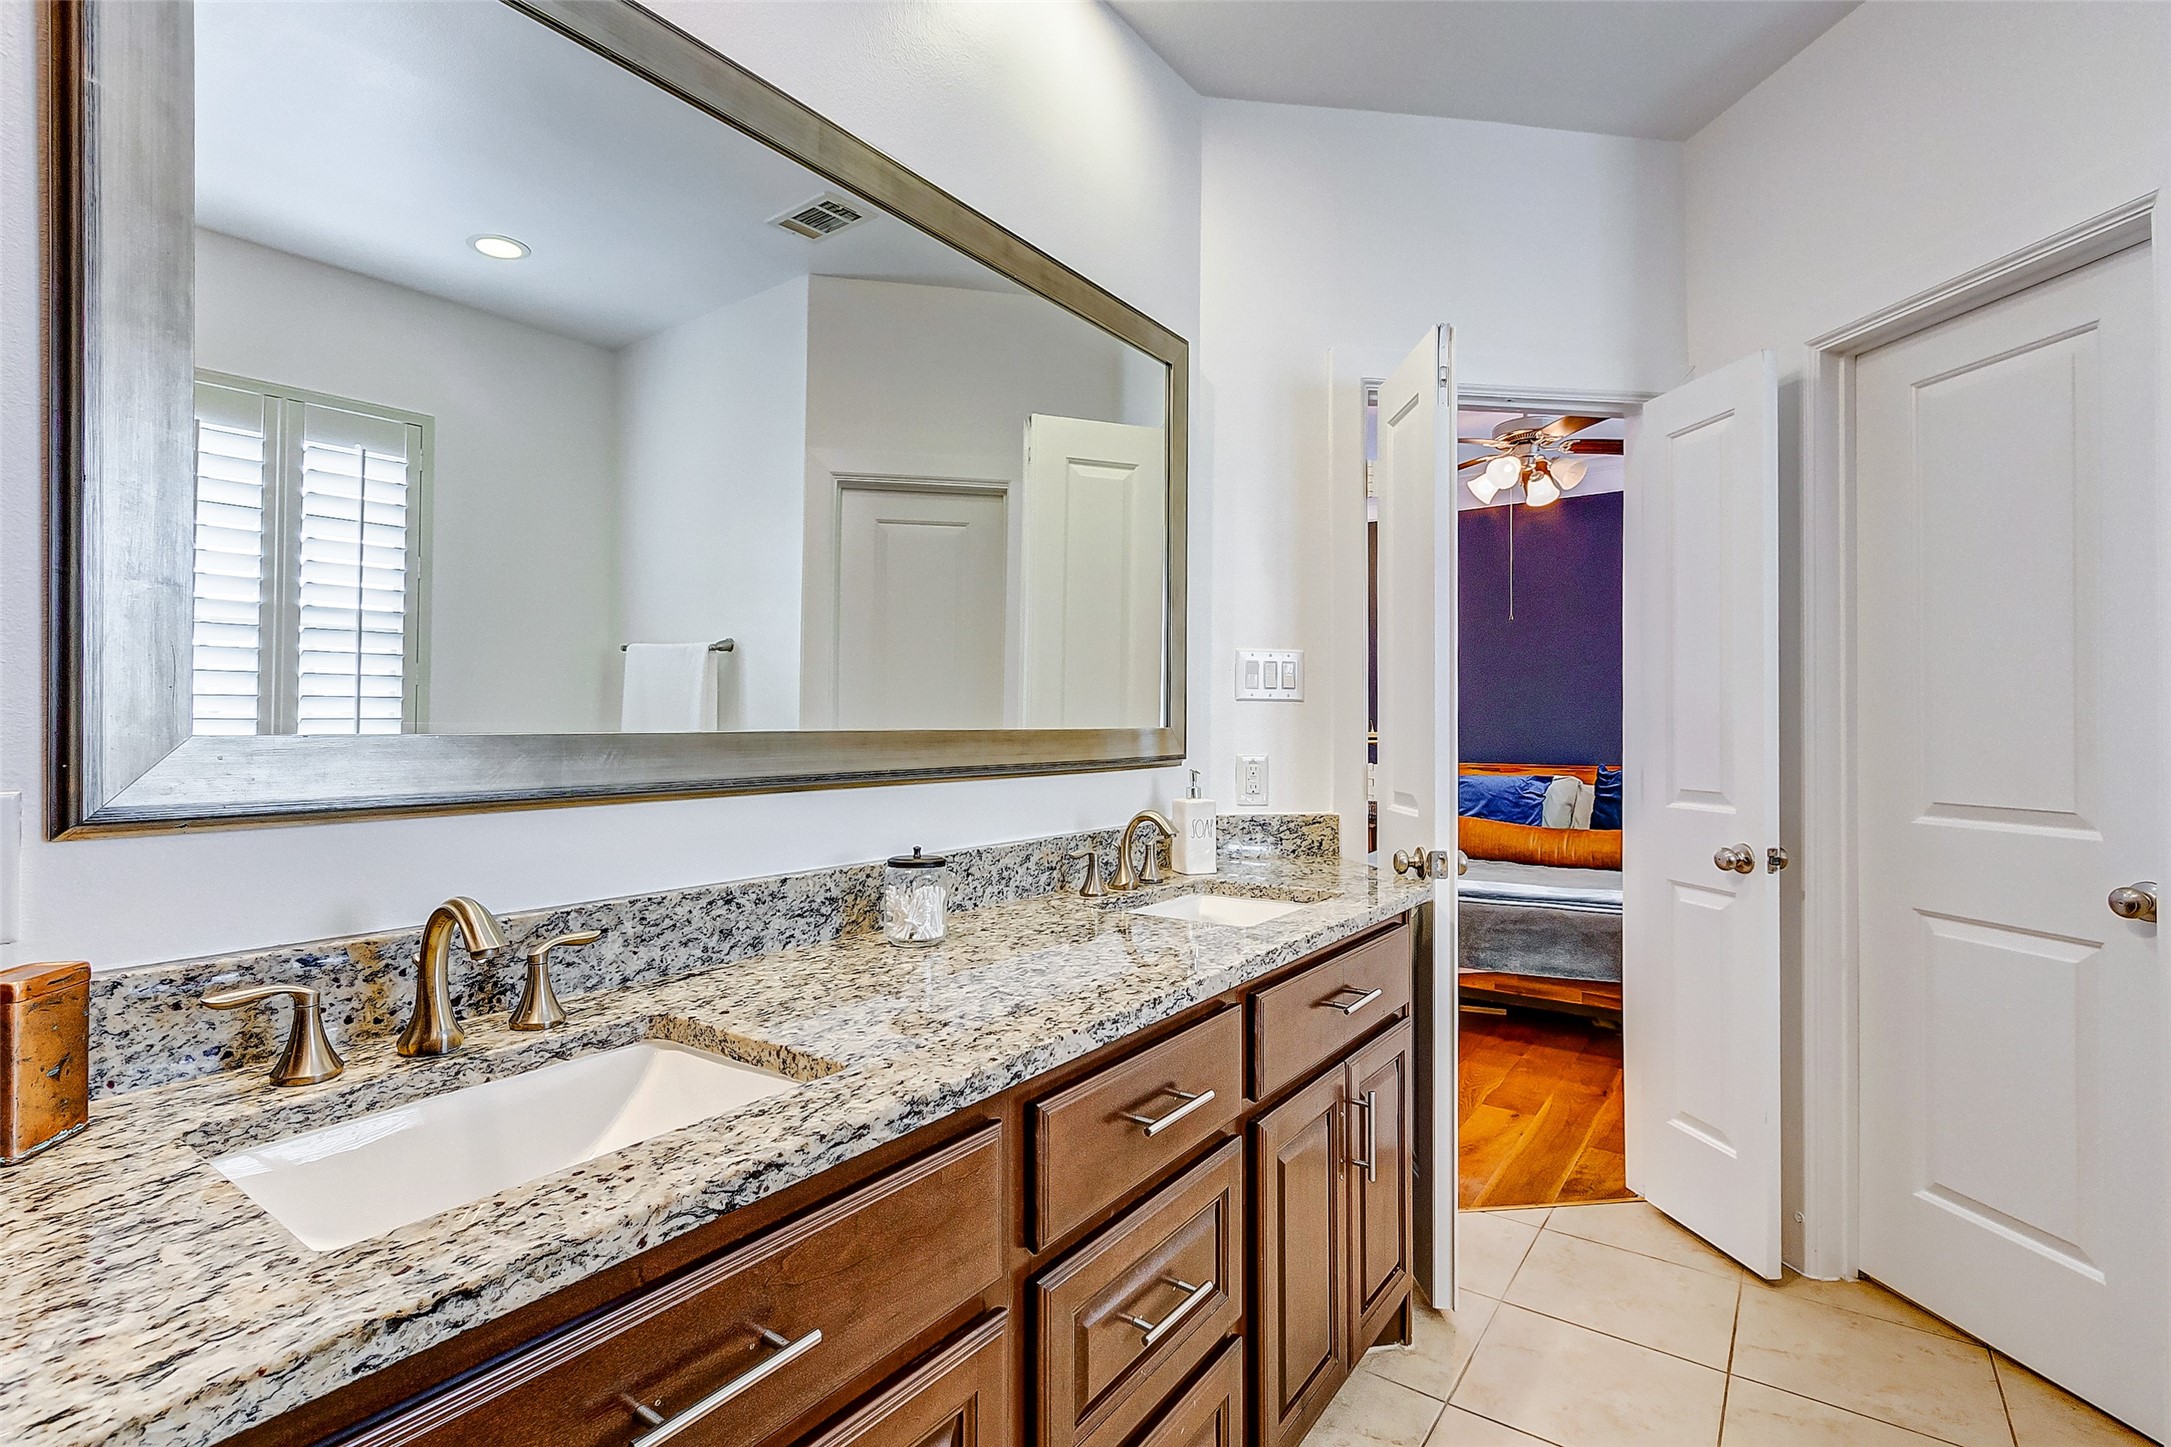 Alternate view of the spacious primary ensuite bathroom also offering a private water closet for plentiful privacy.